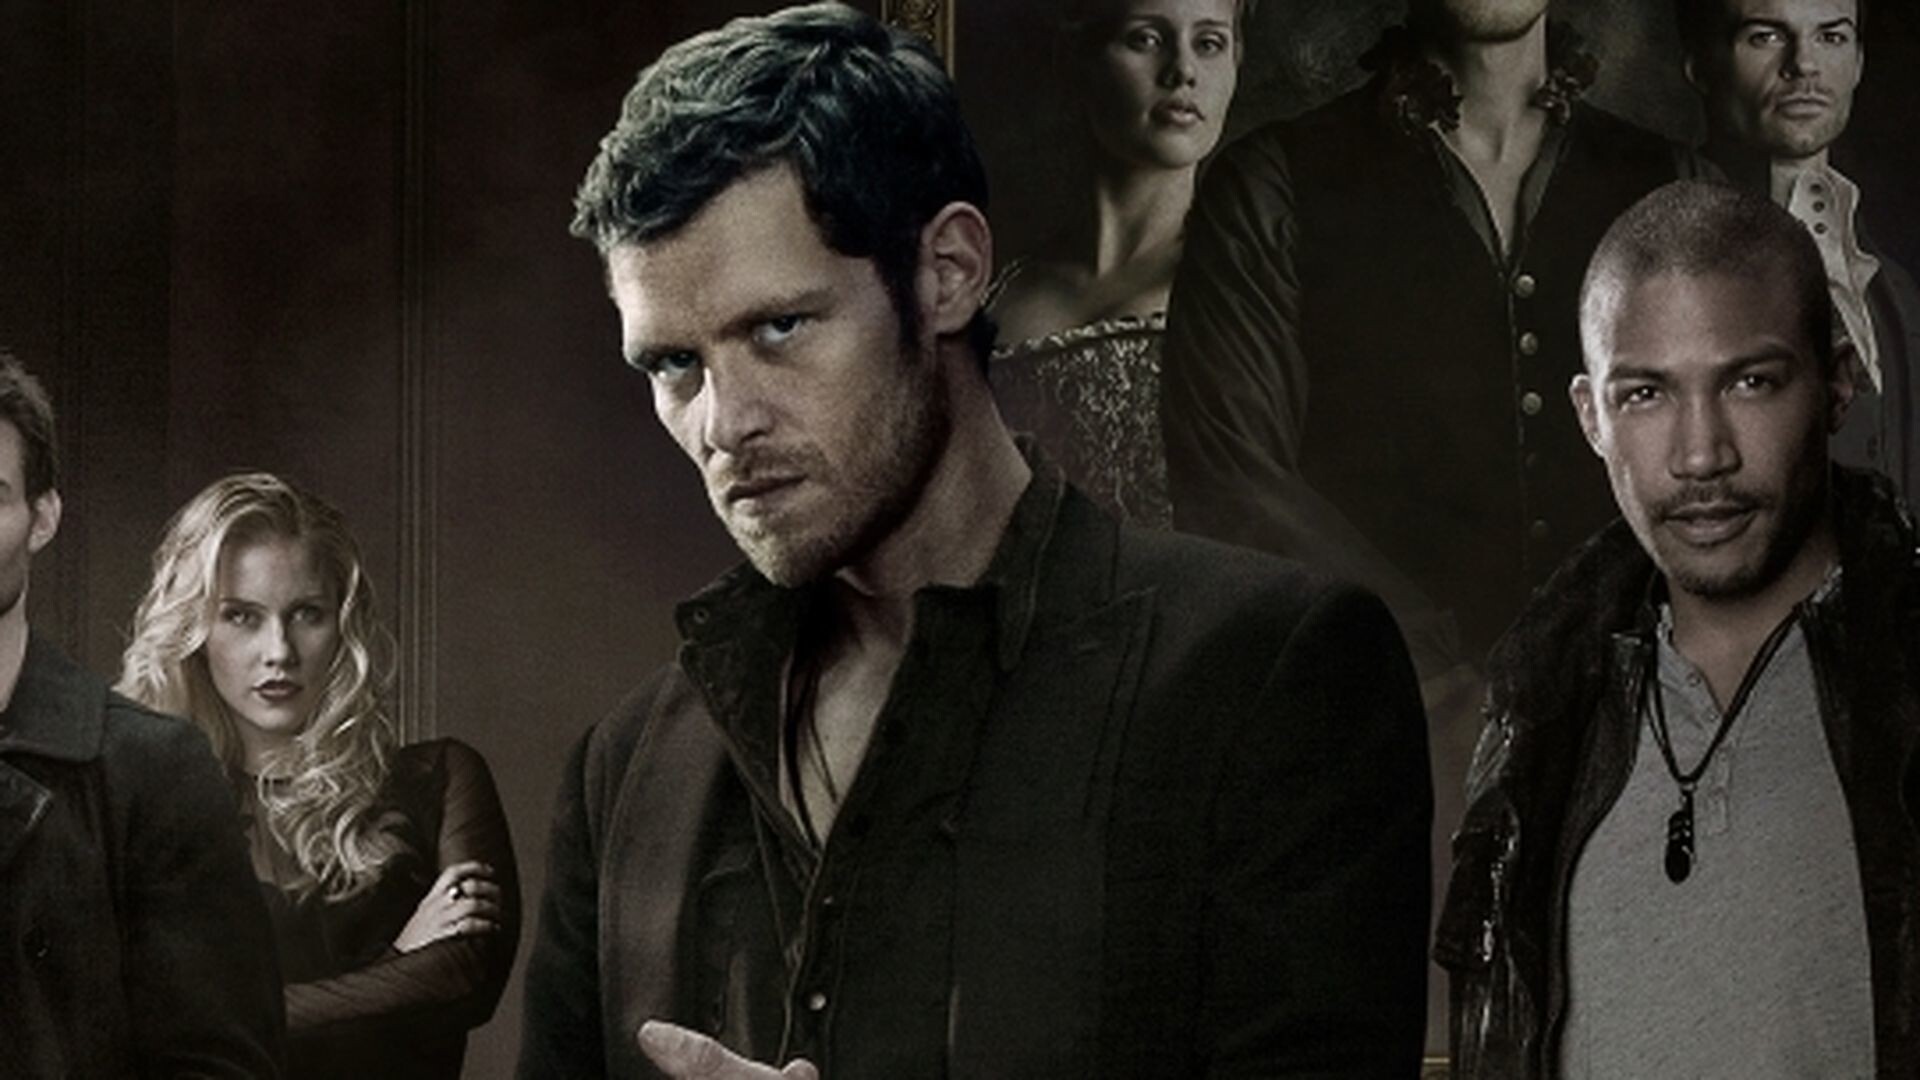 The Originals (TV Series): Klaus And Hope, Fantasy drama which centers around the Mikaelson siblings. 1920x1080 Full HD Background.